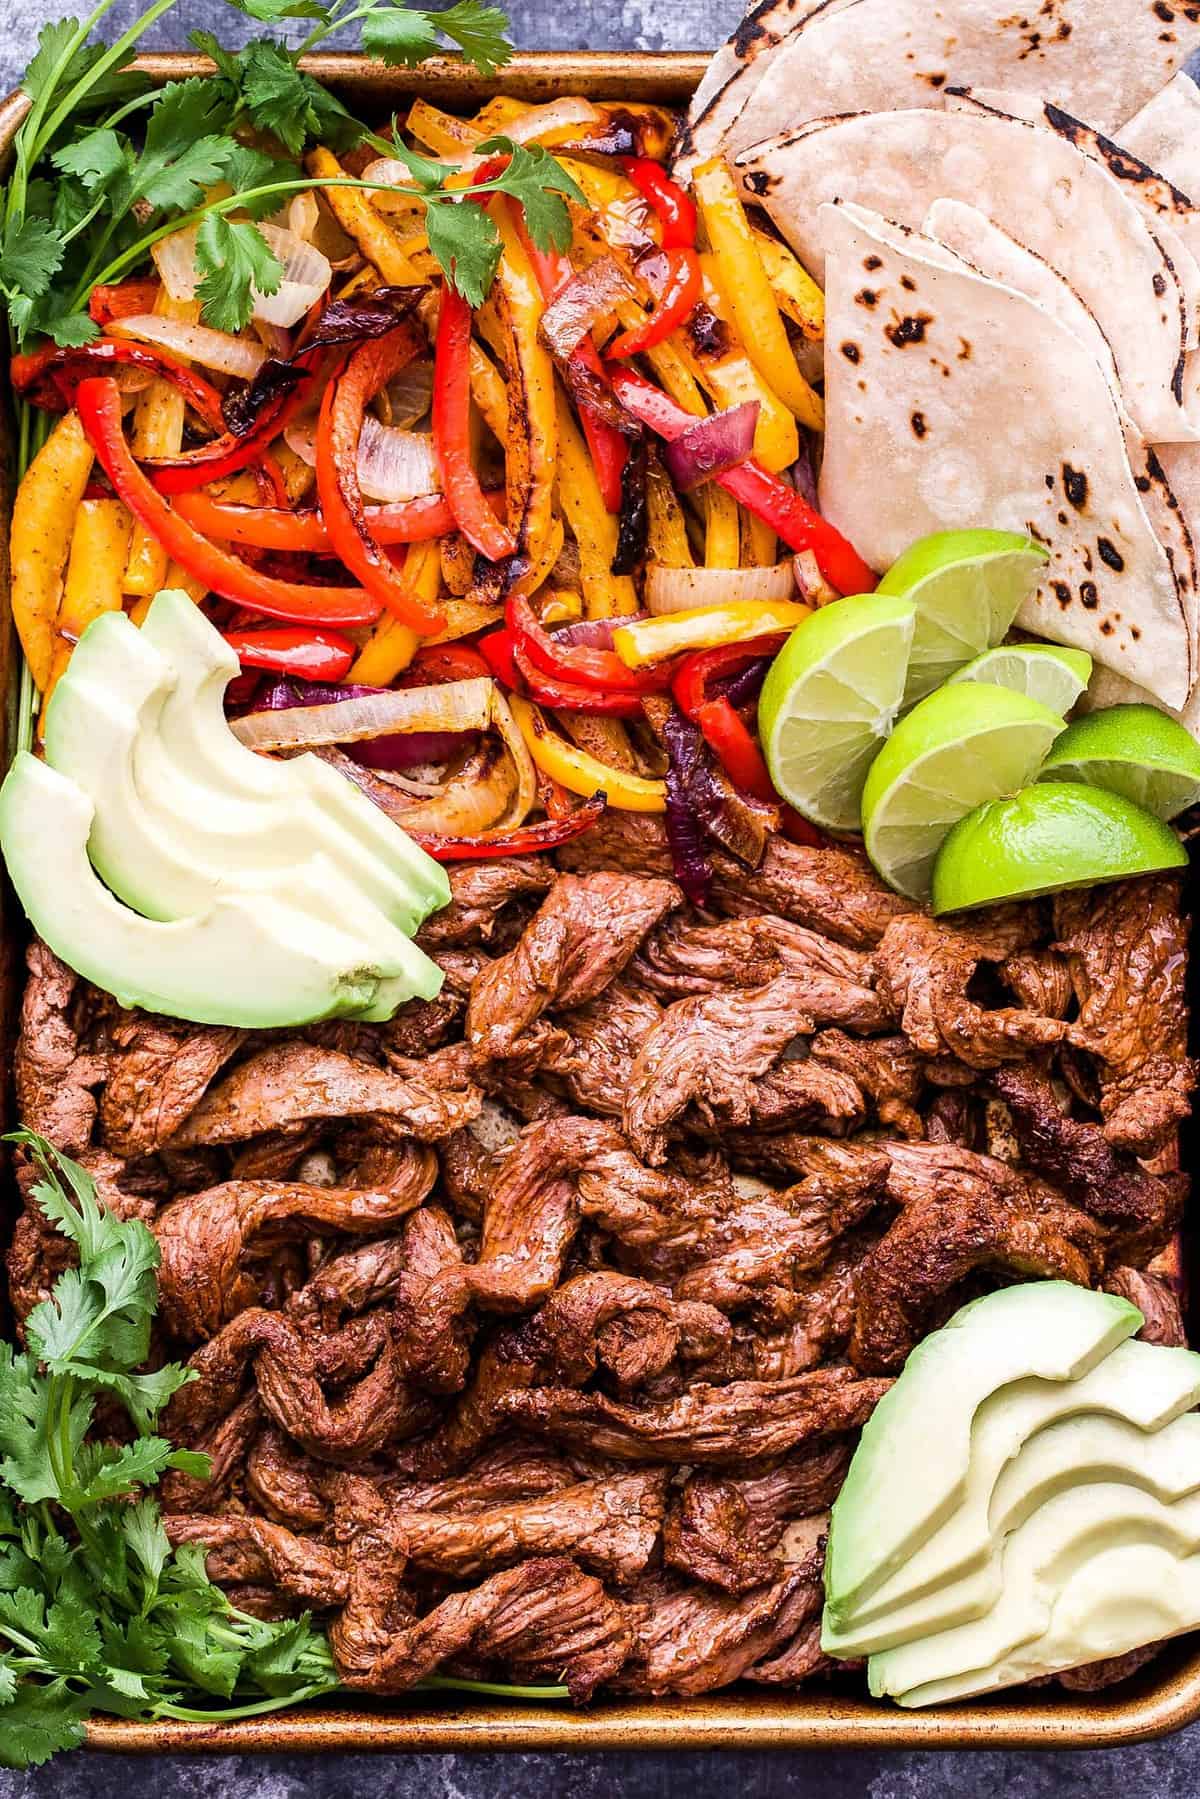  A perfect balance of flavors: savory steak, sweet peppers, and tangy lime 🍈😋